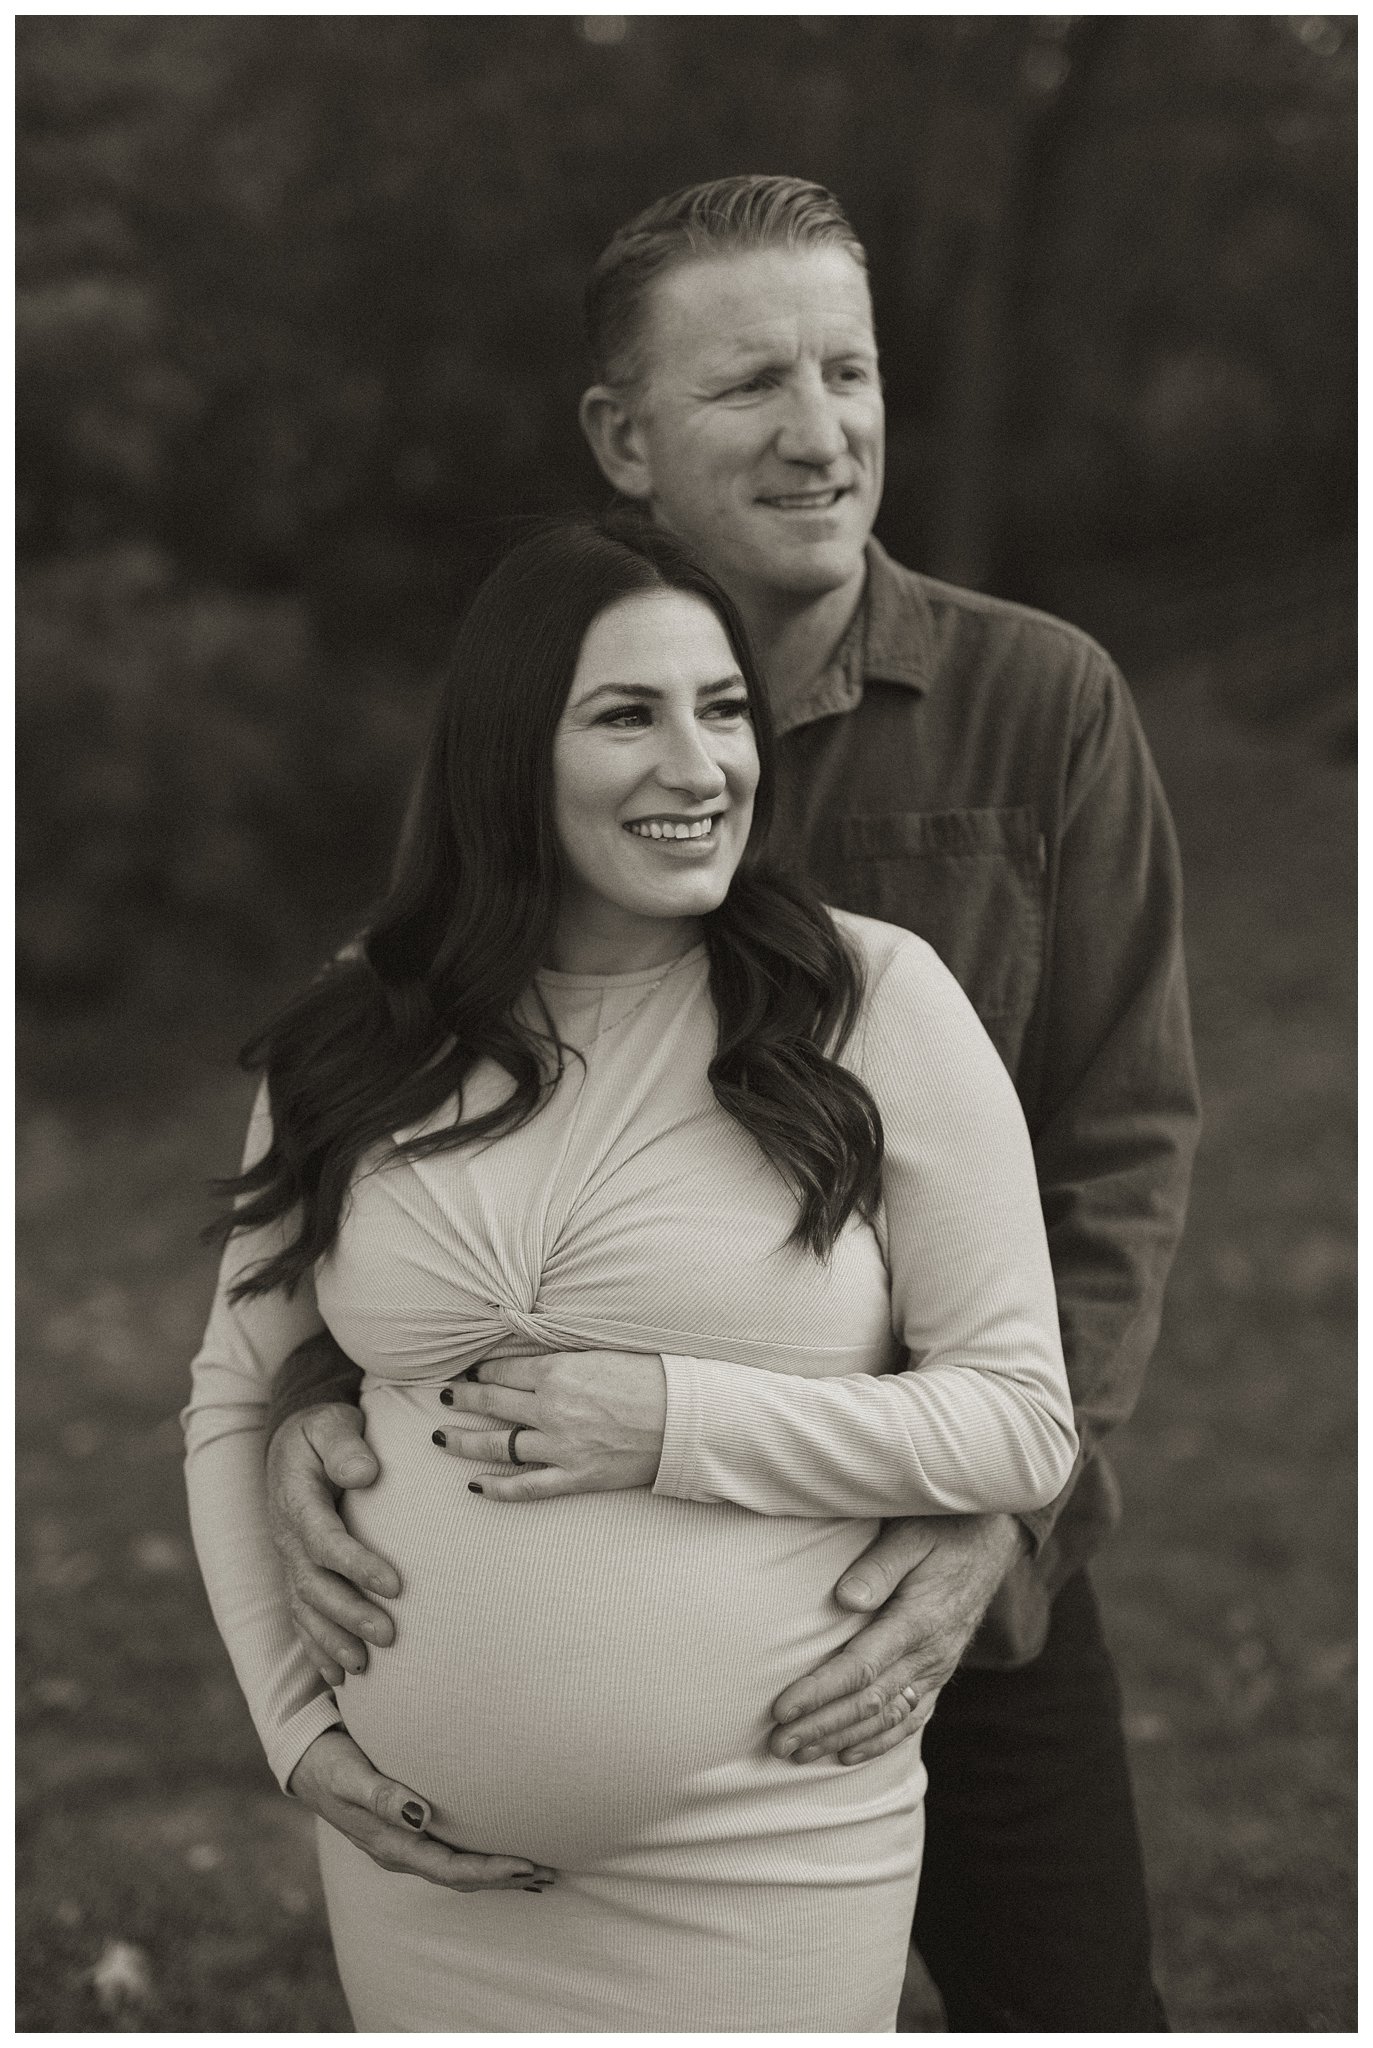 Ashley &amp; Mike Maternity Session at Boise River Greenbelt by Treasure Valley Portrait Photographer, Kamra Fuller Photography